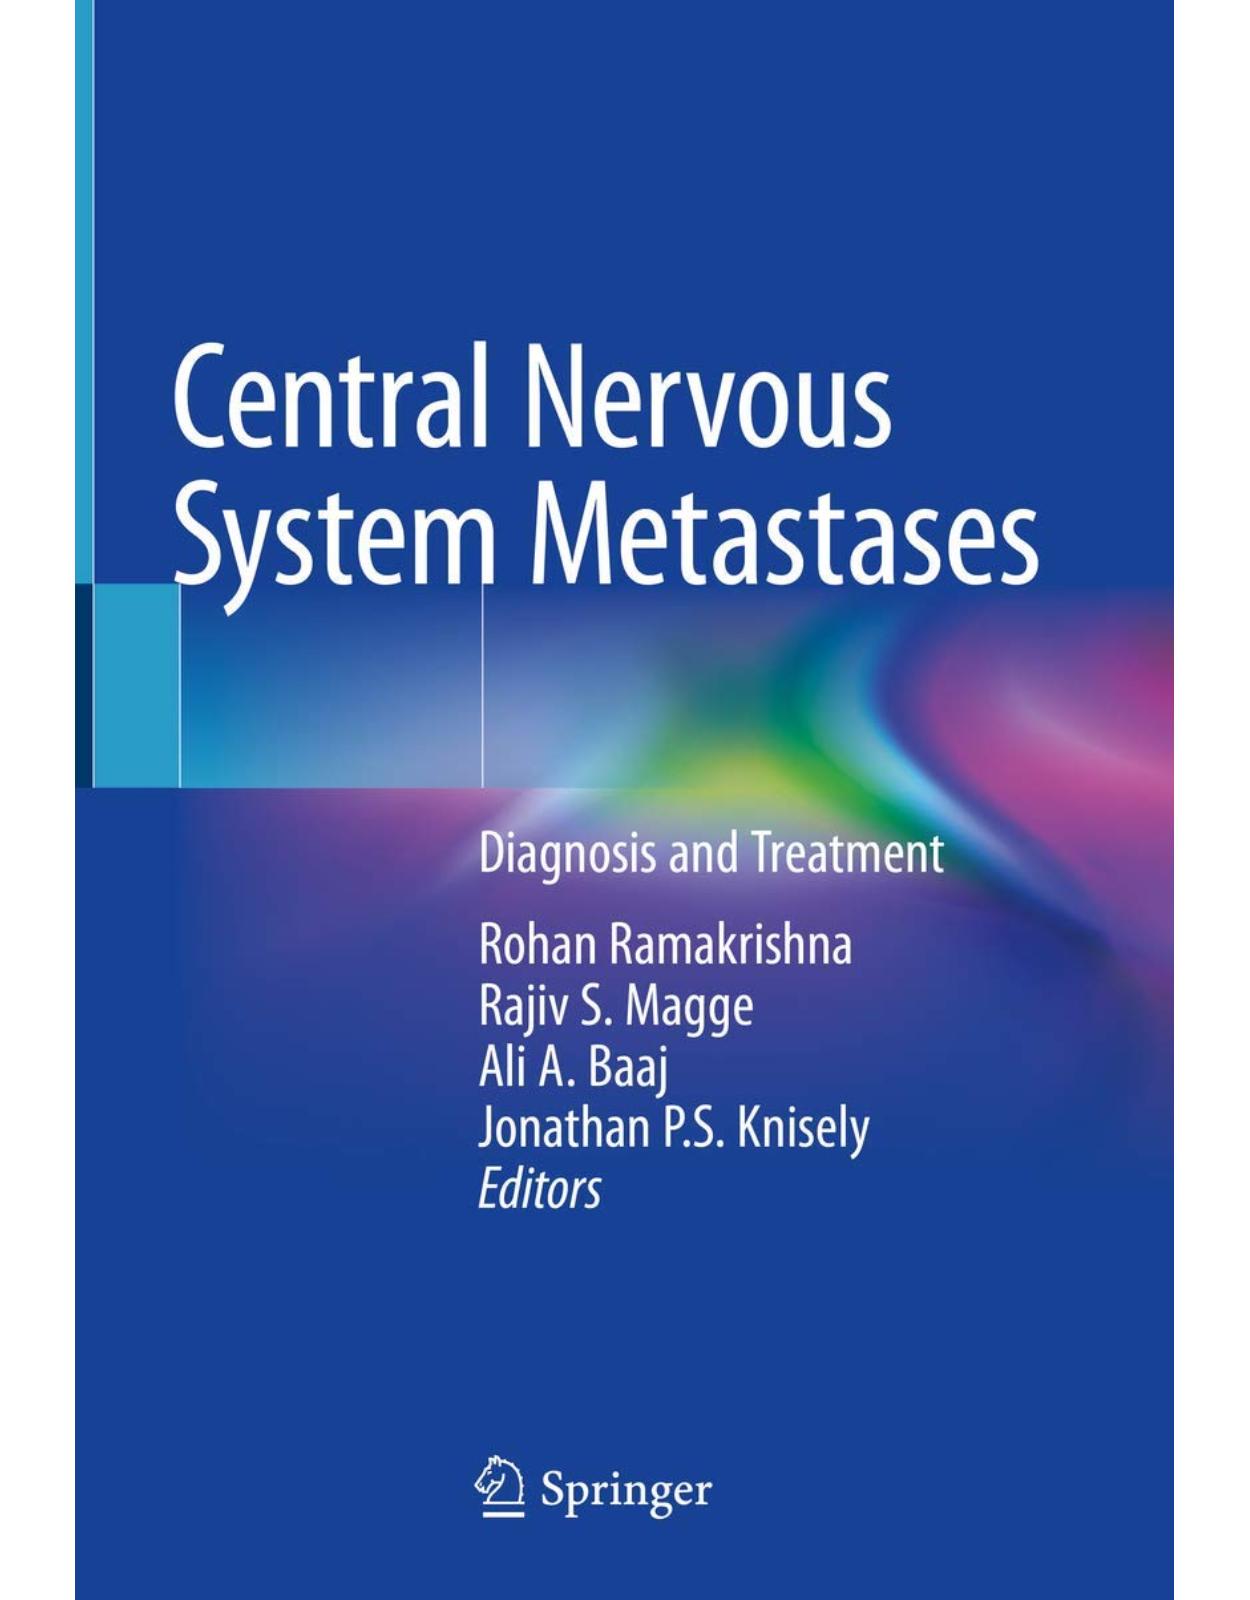 Central Nervous System Metastases. Diagnosis and Treatment